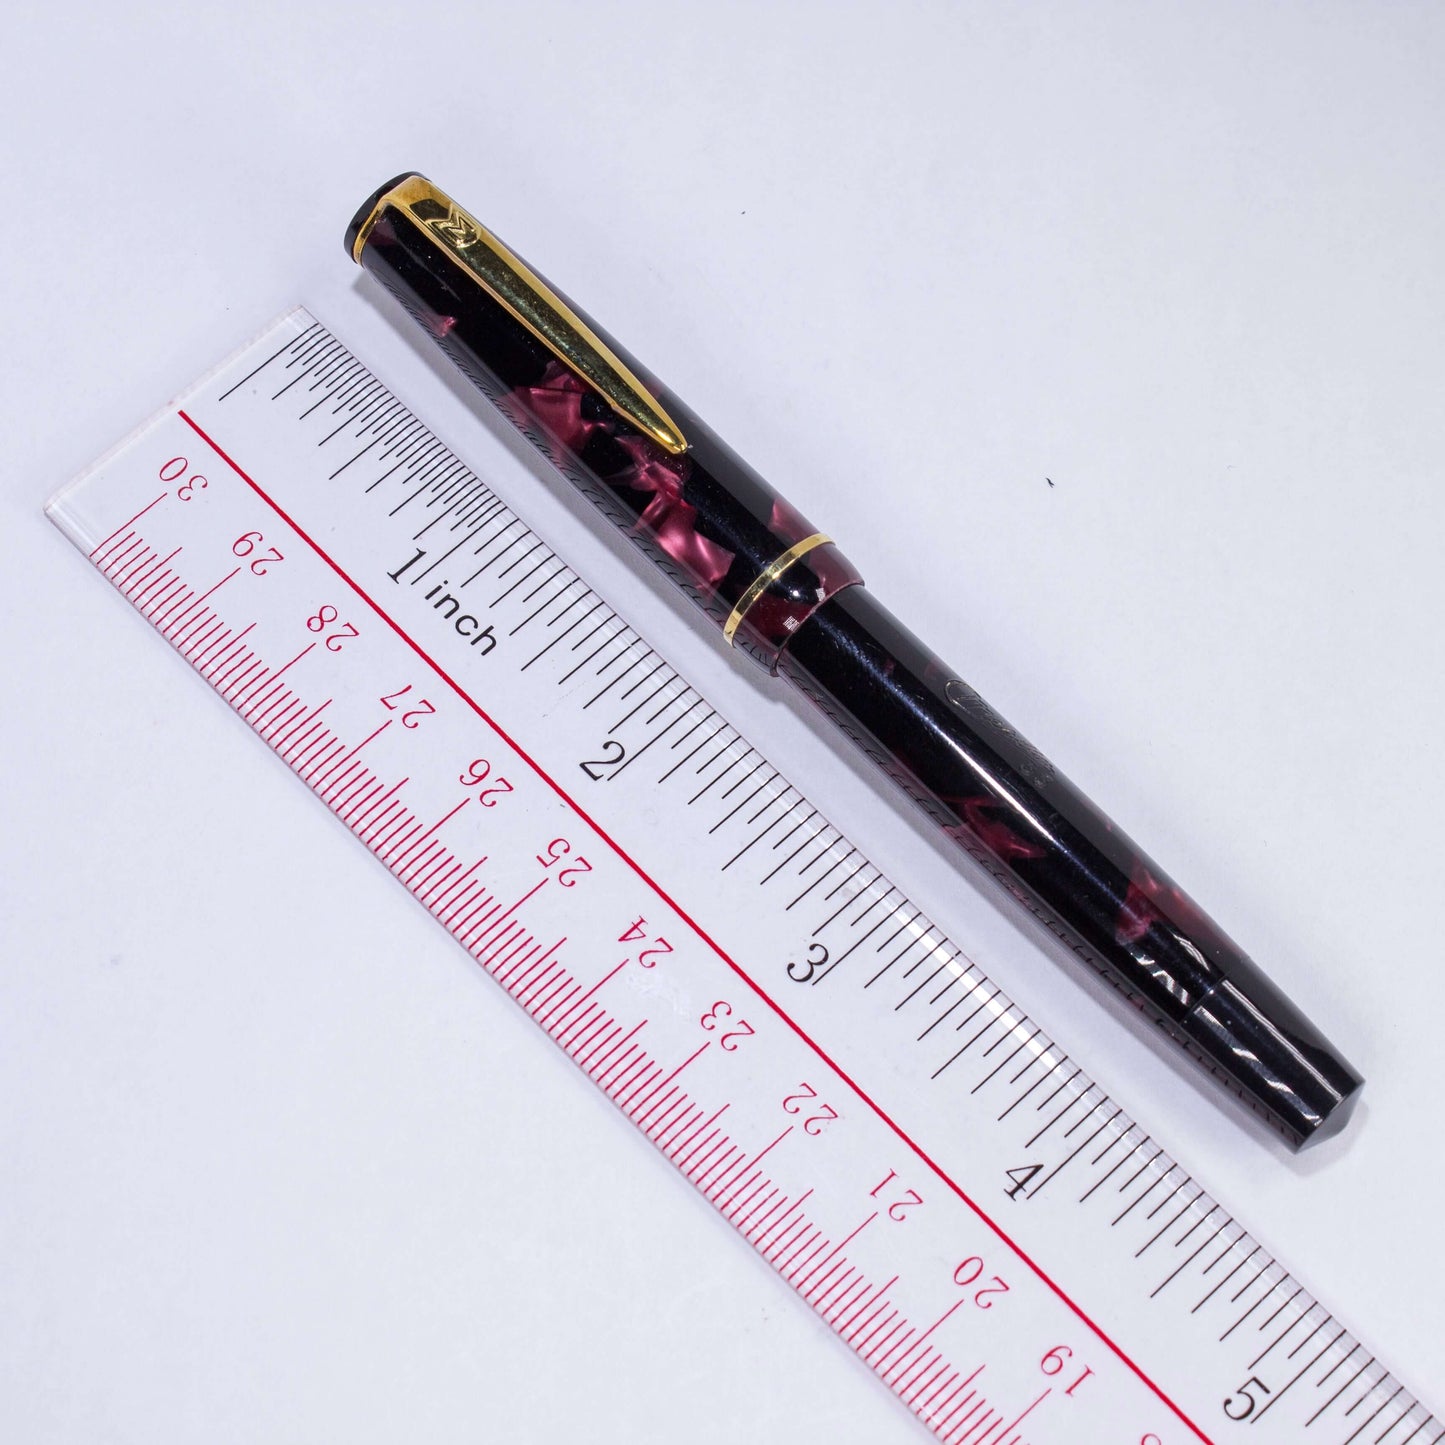 Merlin 33 Fountain Pen, Red Marble, Gold Trim 14K Merlin Nib, Flexible, Button Filler with New Sac Installed Type: Vintage Button Filler Fountain Pen Product Name: Merlin Manufacture Year: 1950s, made in Europe Length: 4 3/4 Filling System: Button Filler,